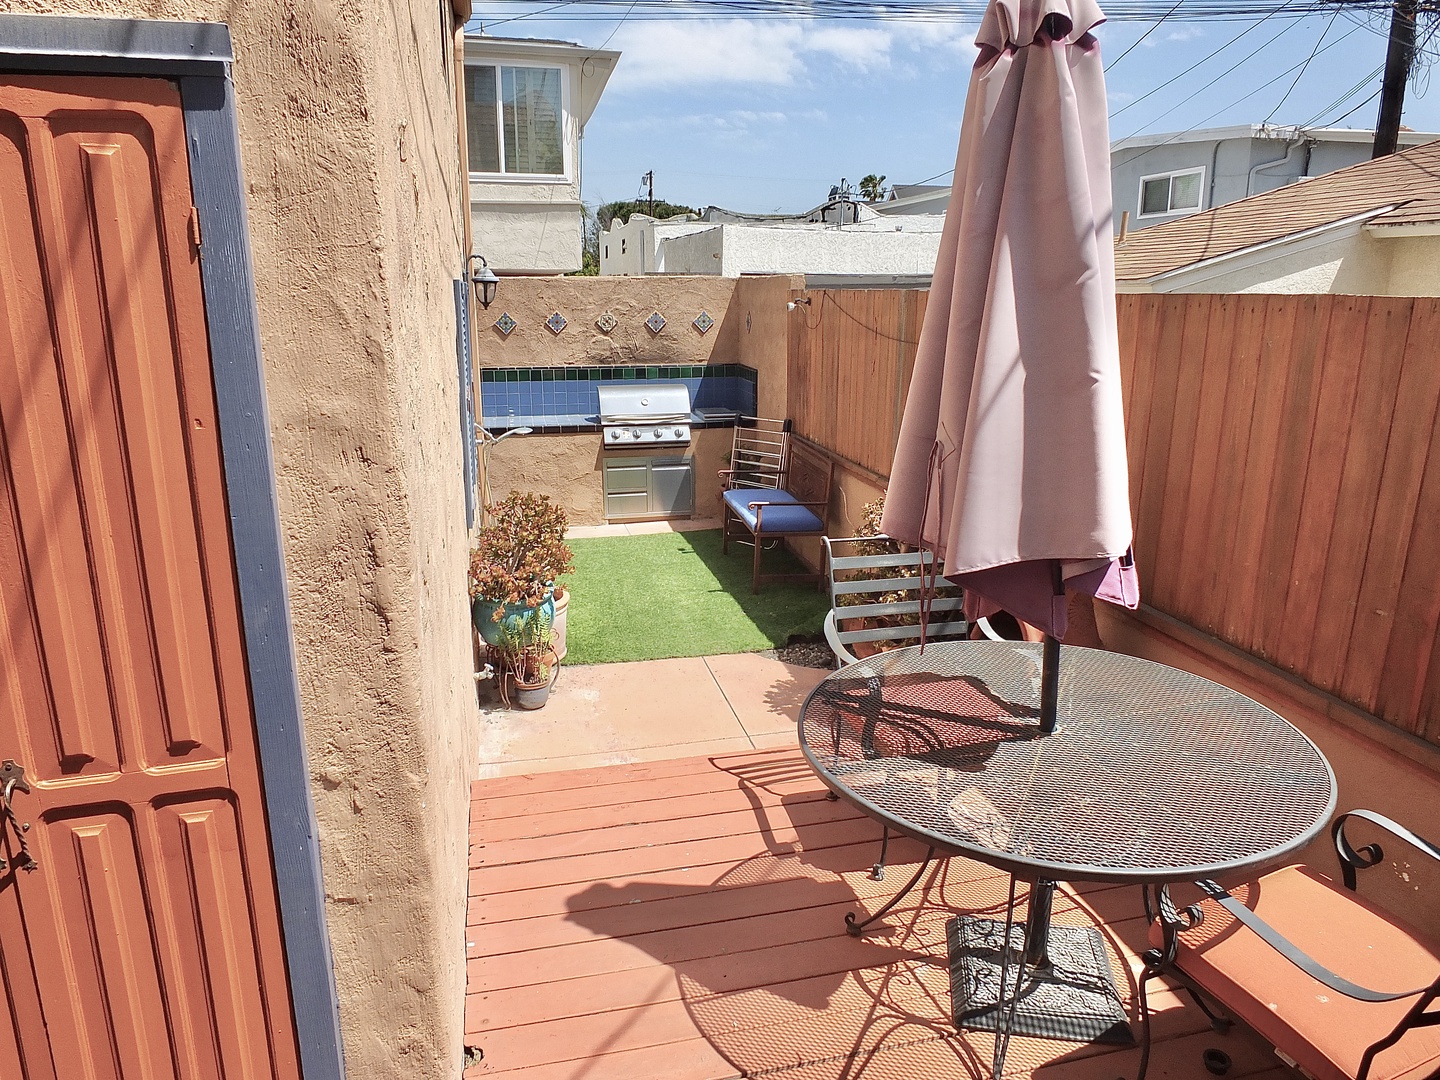 Enjoy al fresco dining in the back yard, with a gas grill and dining seating for 2